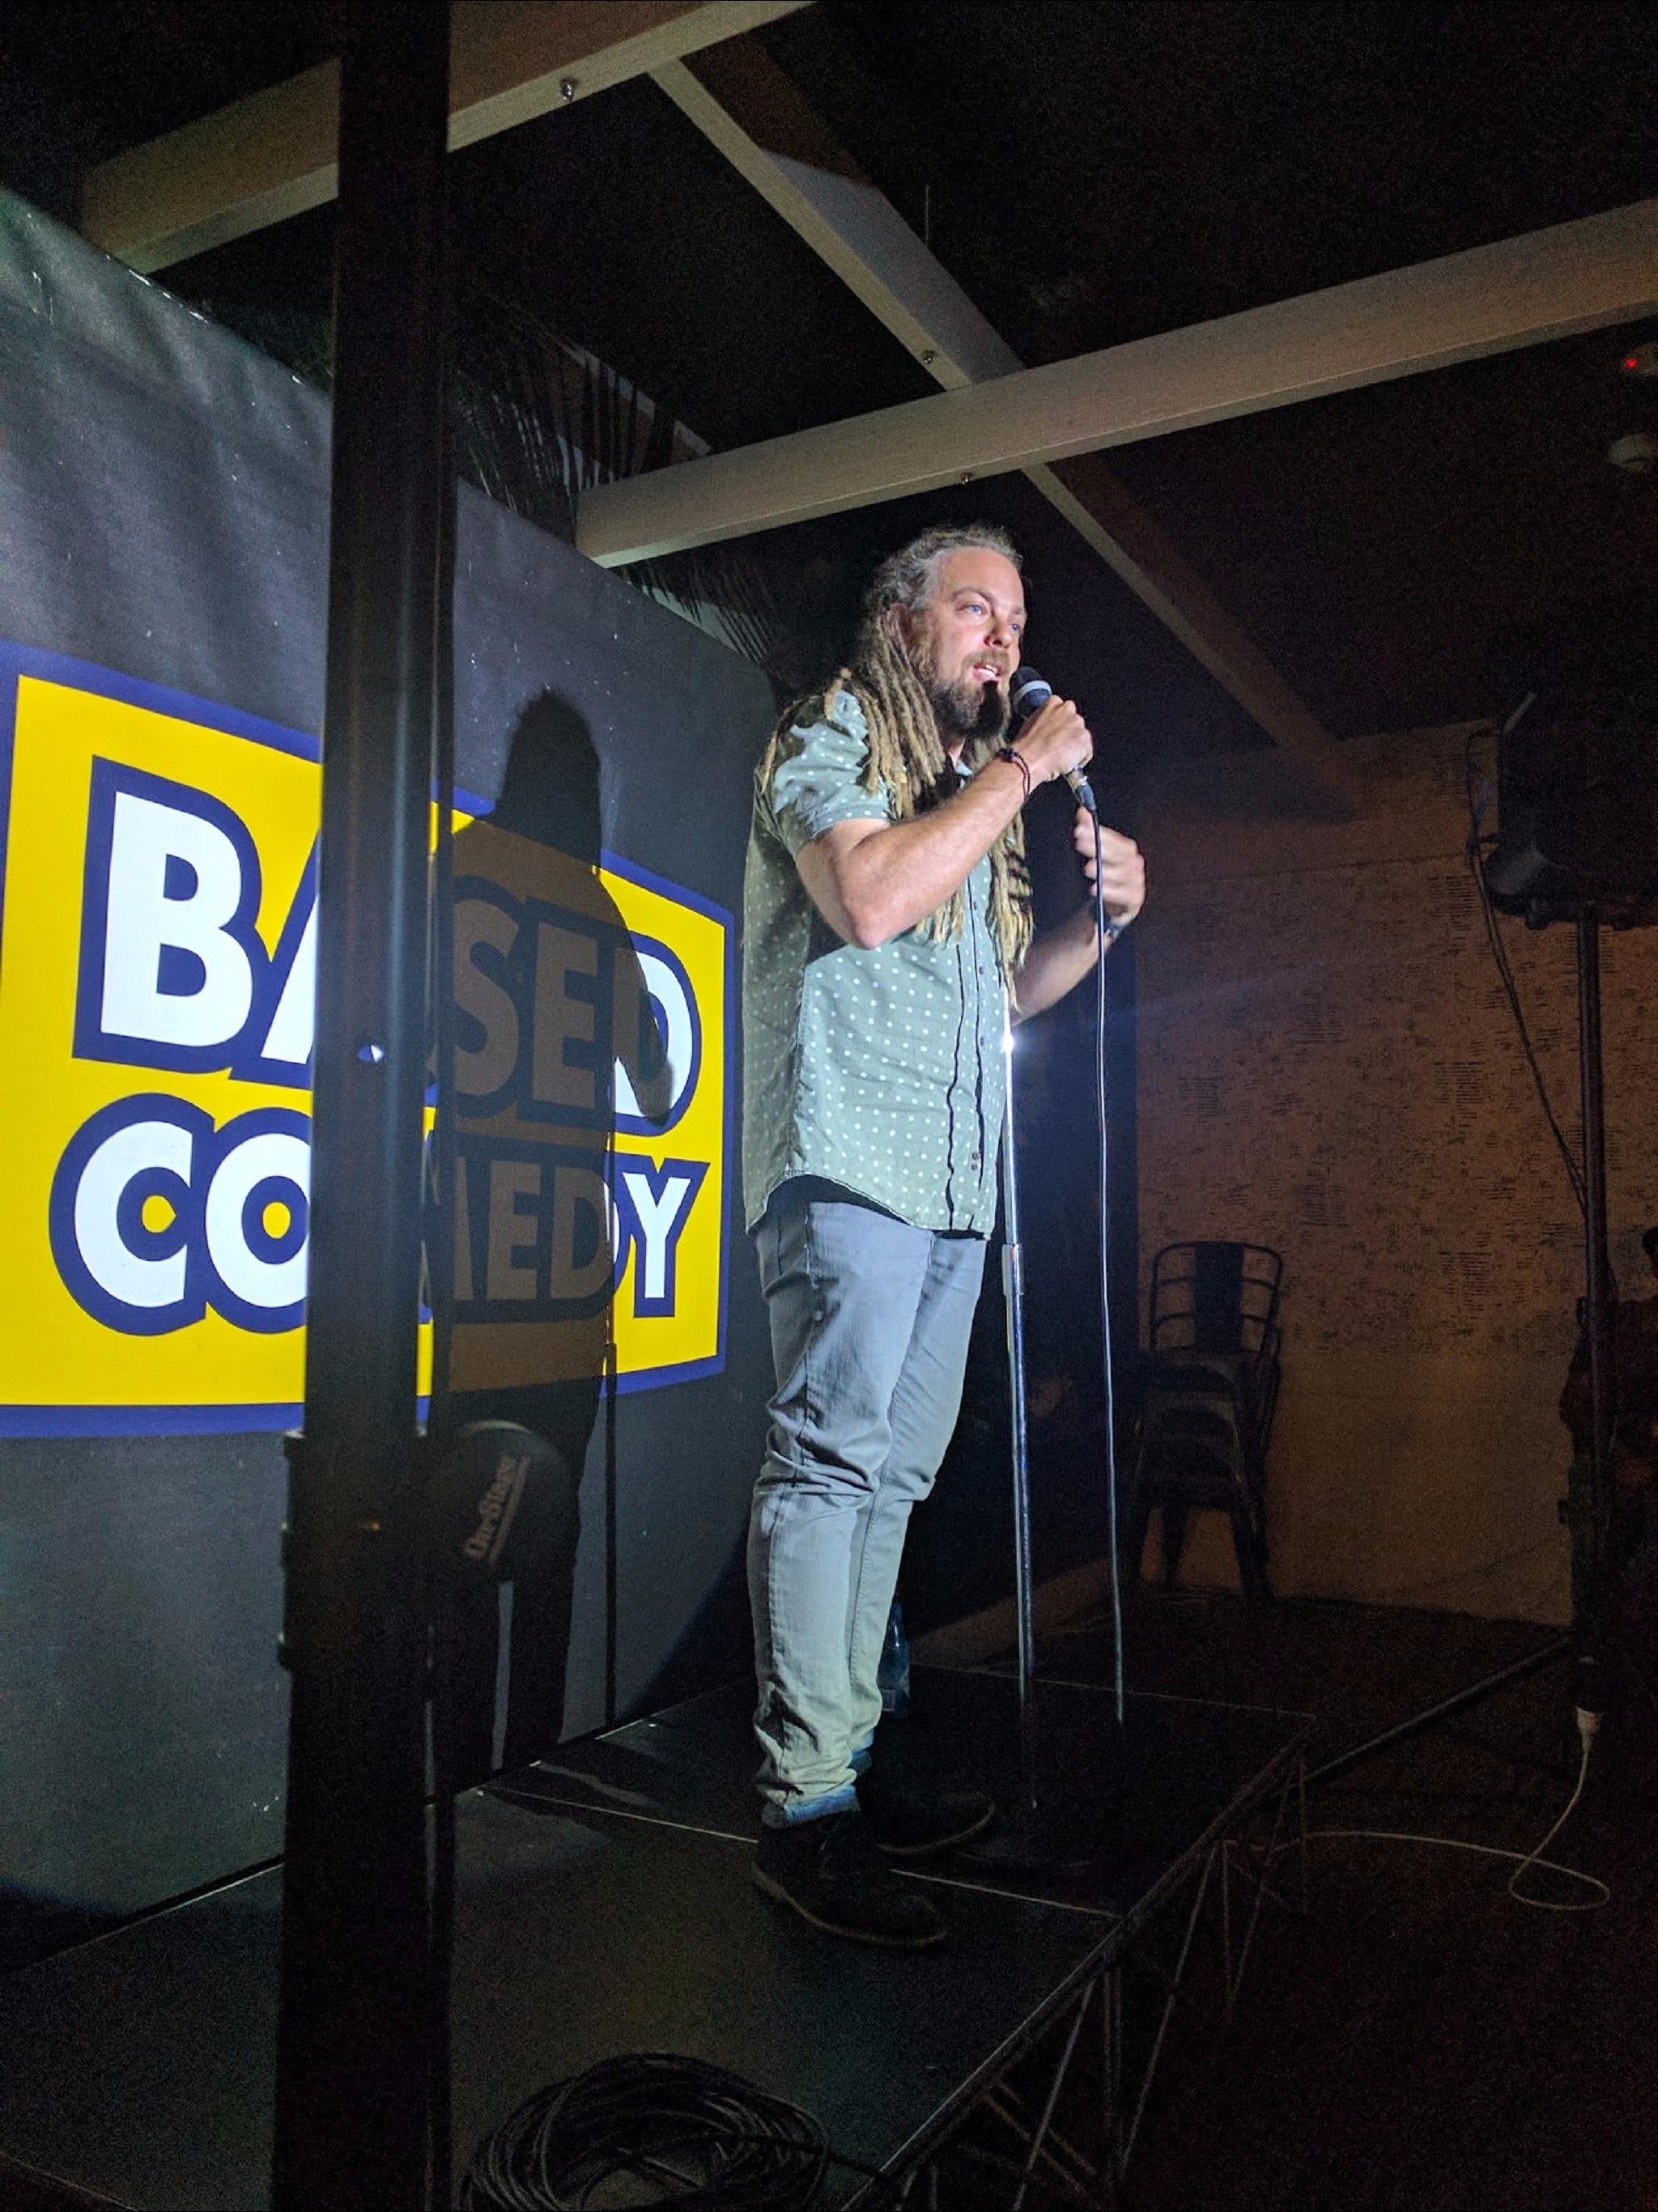 Based Comedy at The Palm Beach Hotel - Carnarvon Accommodation